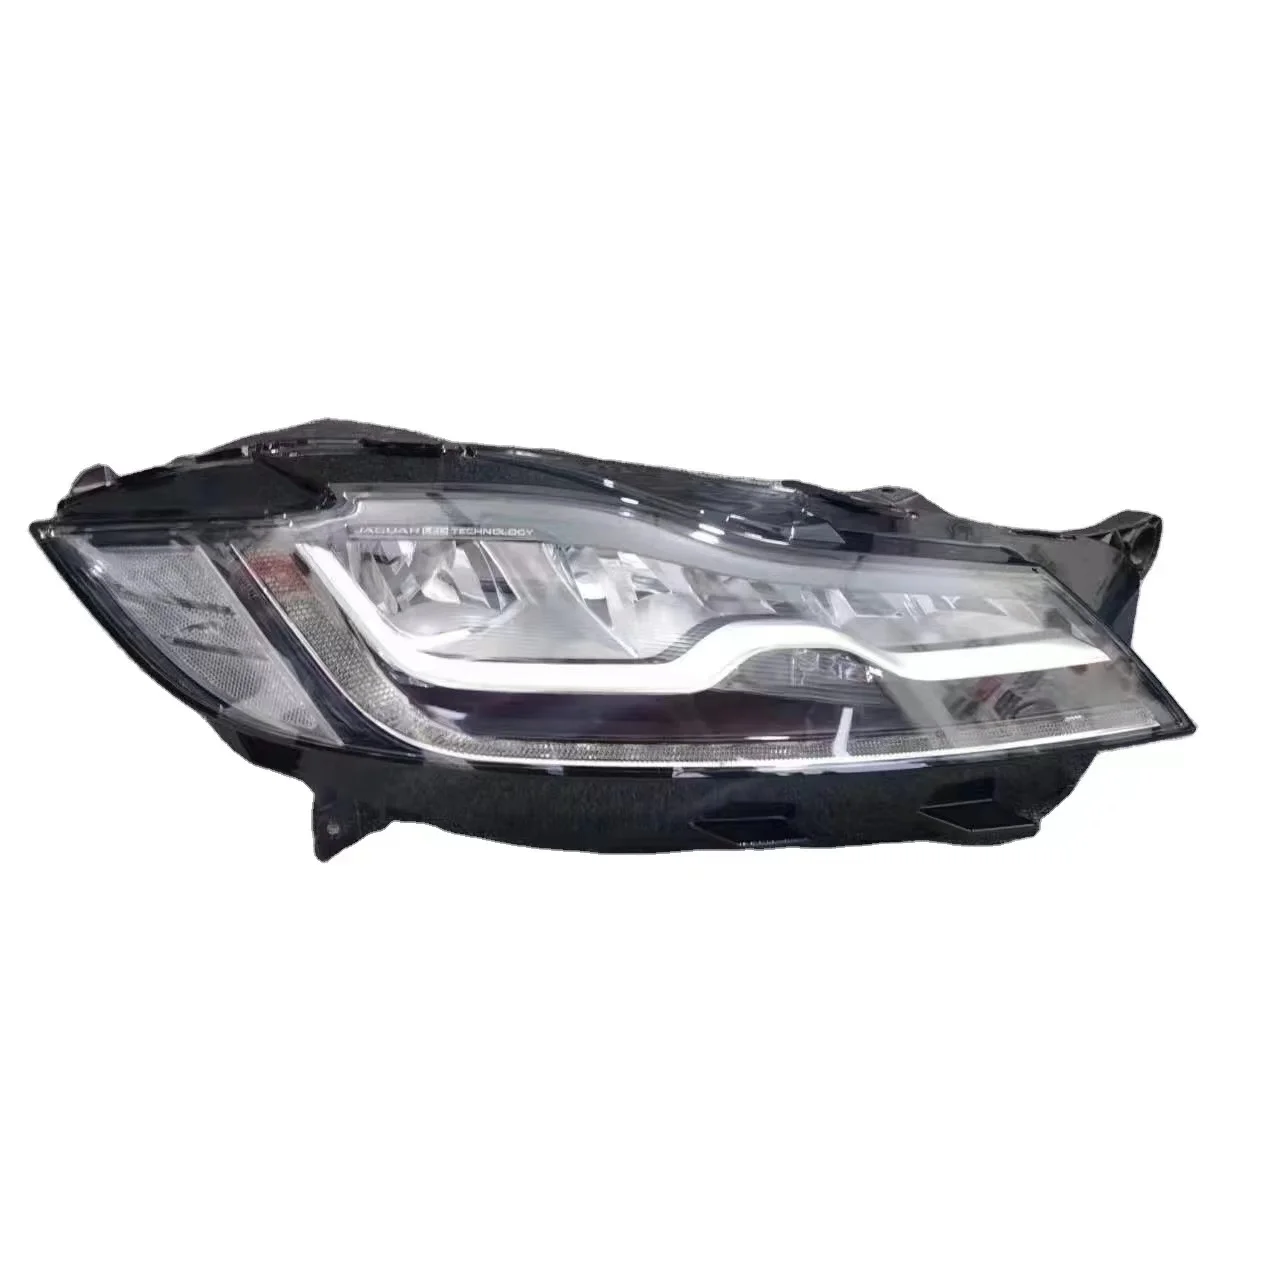 

Applicable to Jaguar Xe, XF, xjl, XJ, XFL, f-space, left and right headlamp assemblies, old models, modified new front lamps